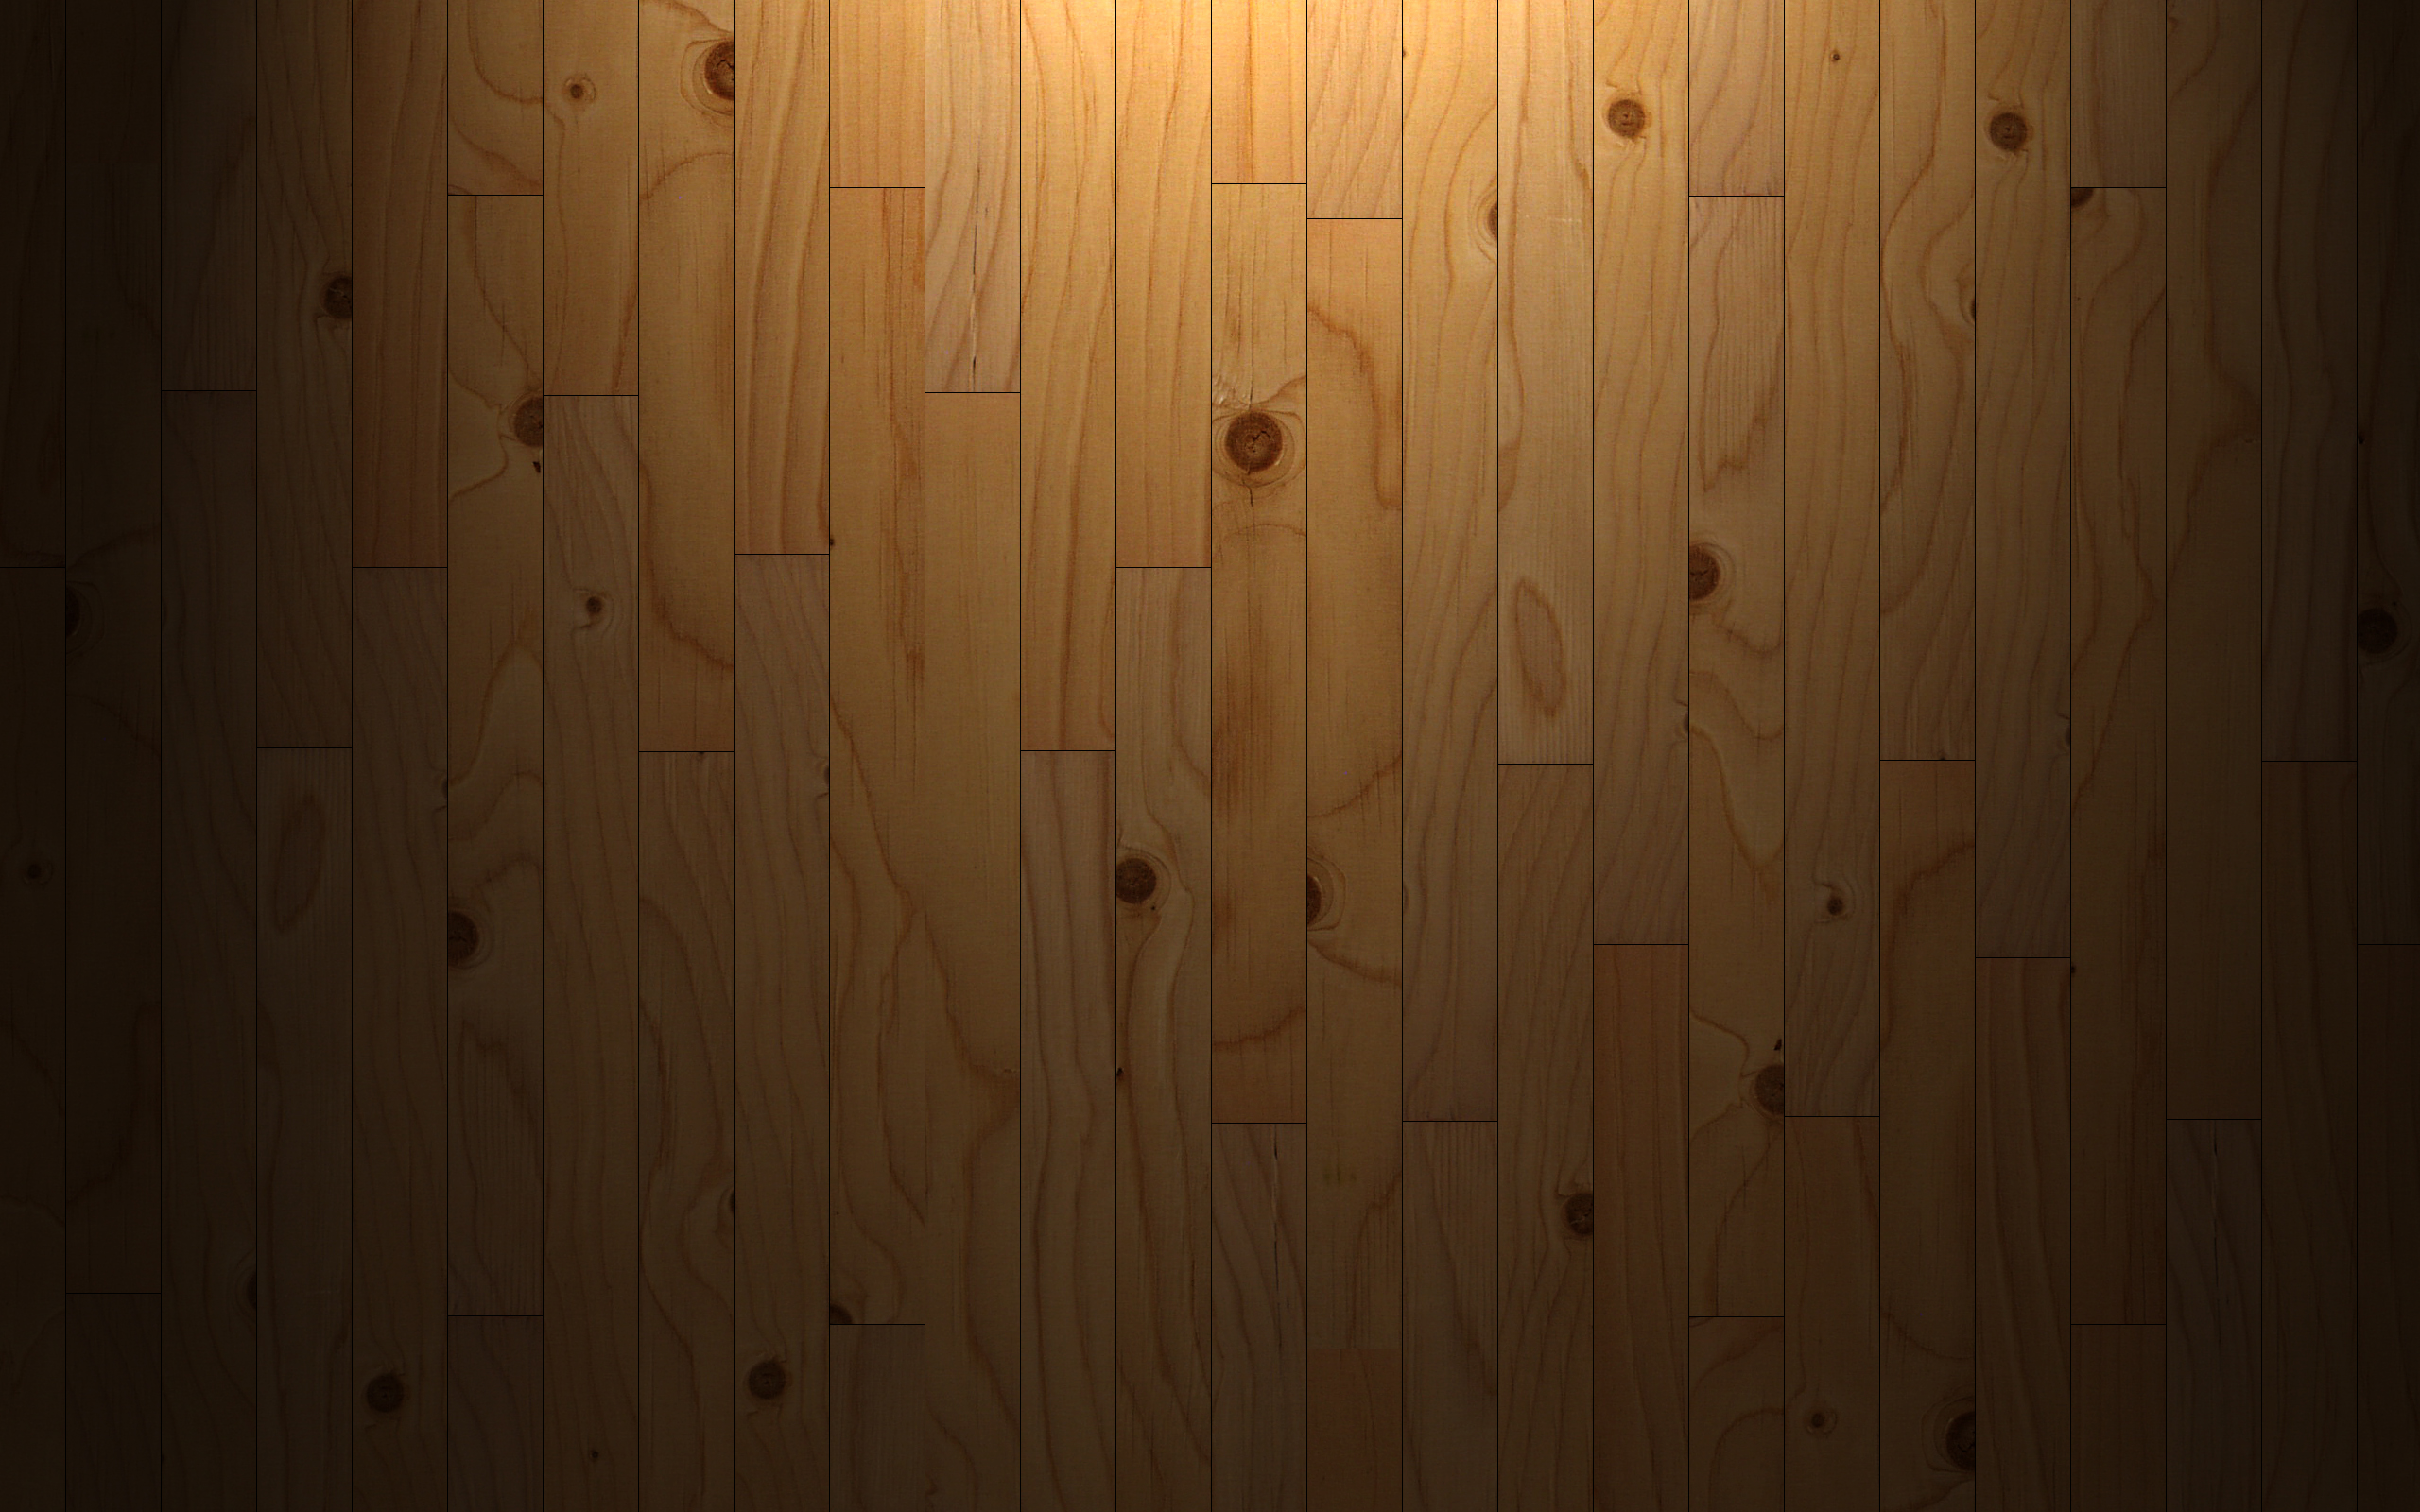 General 2560x1600 wood abstract wooden surface texture spotlights pattern